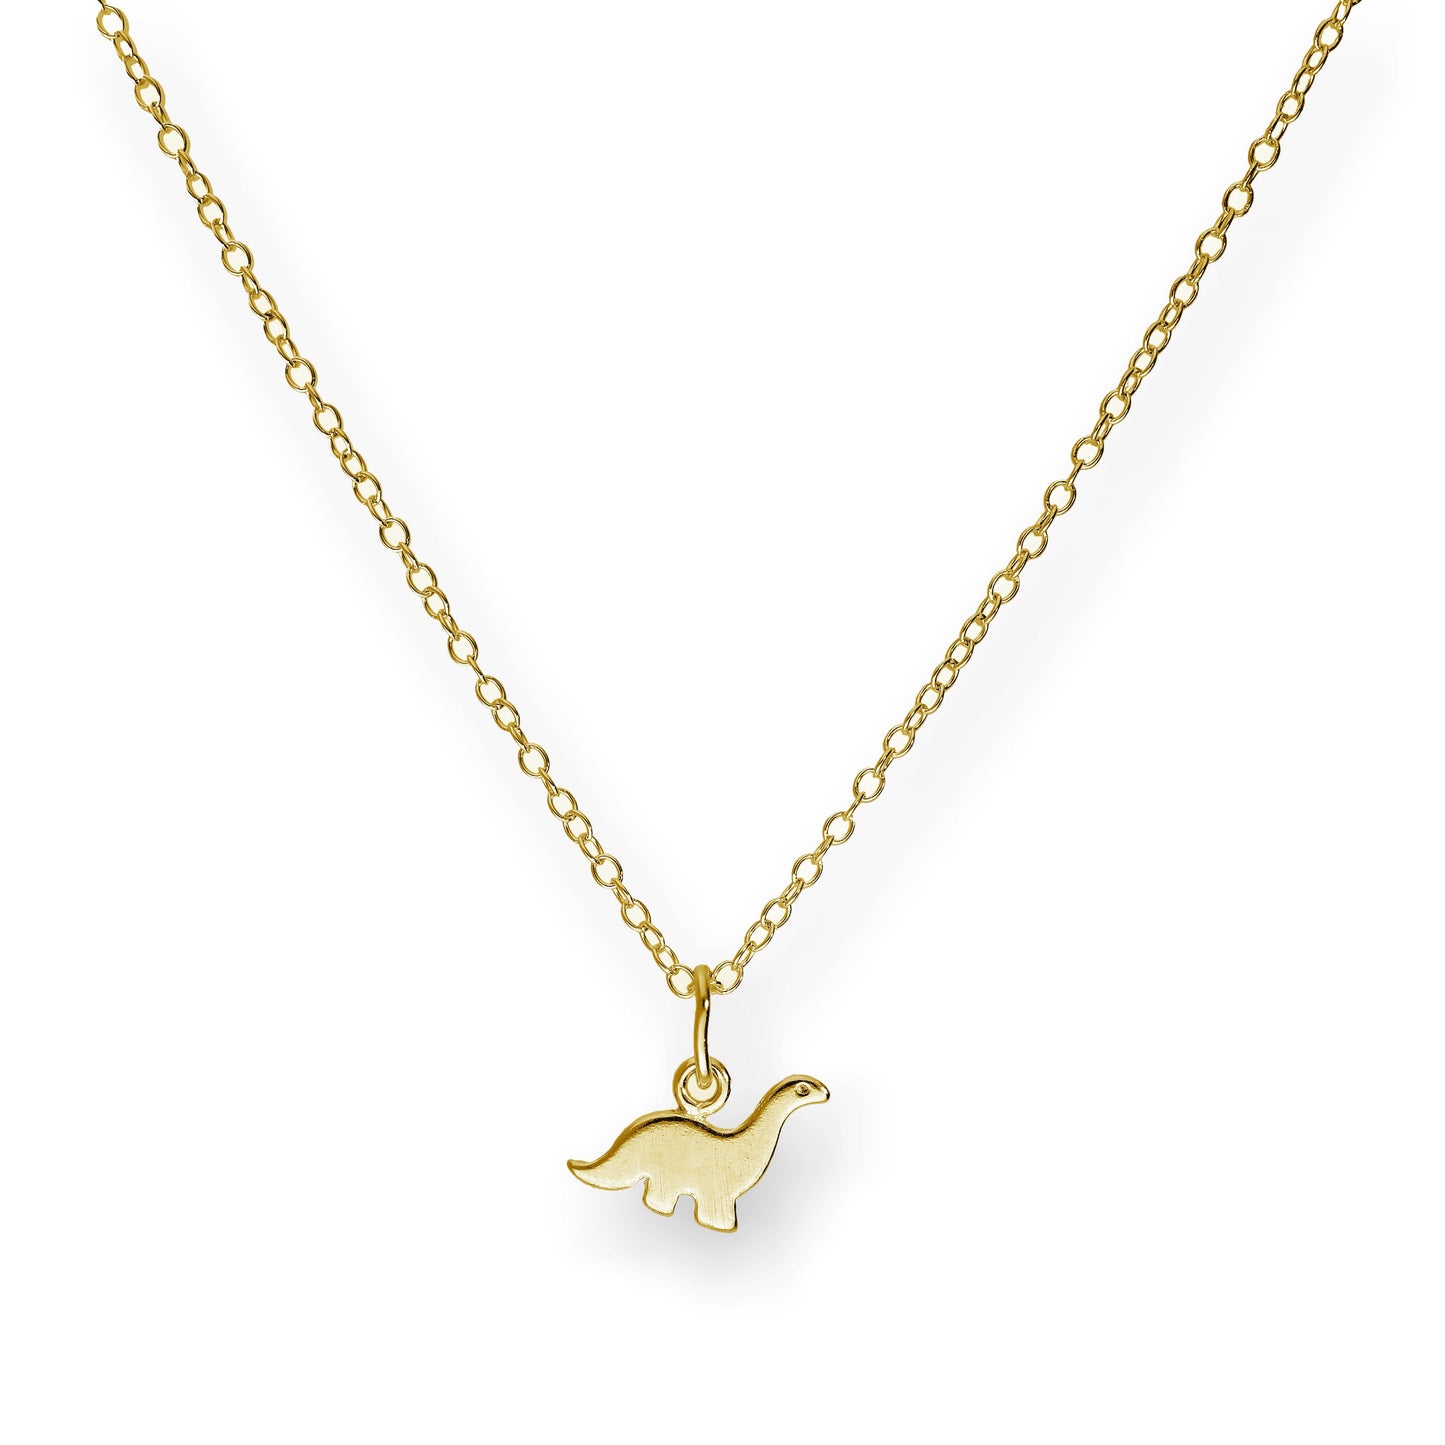 Small Gold Plated Sterling Silver 18 Inch Dinosaur Necklace